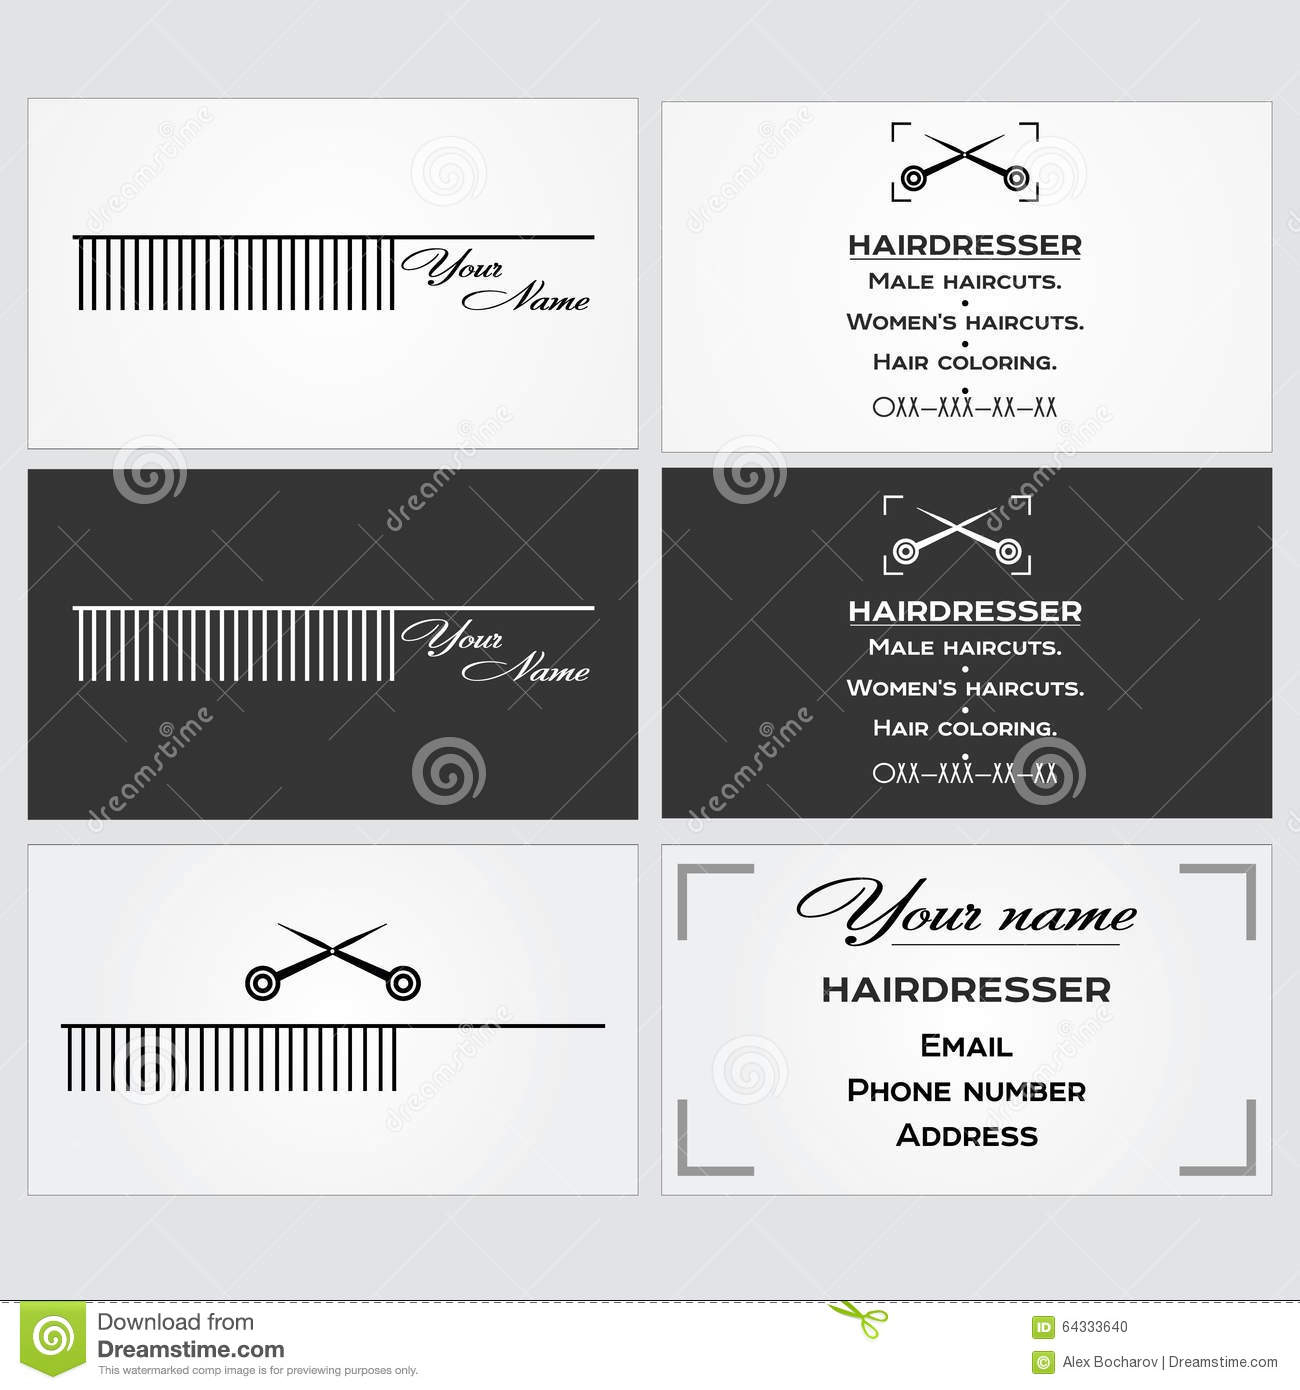 Business Card Template For A Hairdresser. Stock Vector Throughout Hairdresser Business Card Templates Free